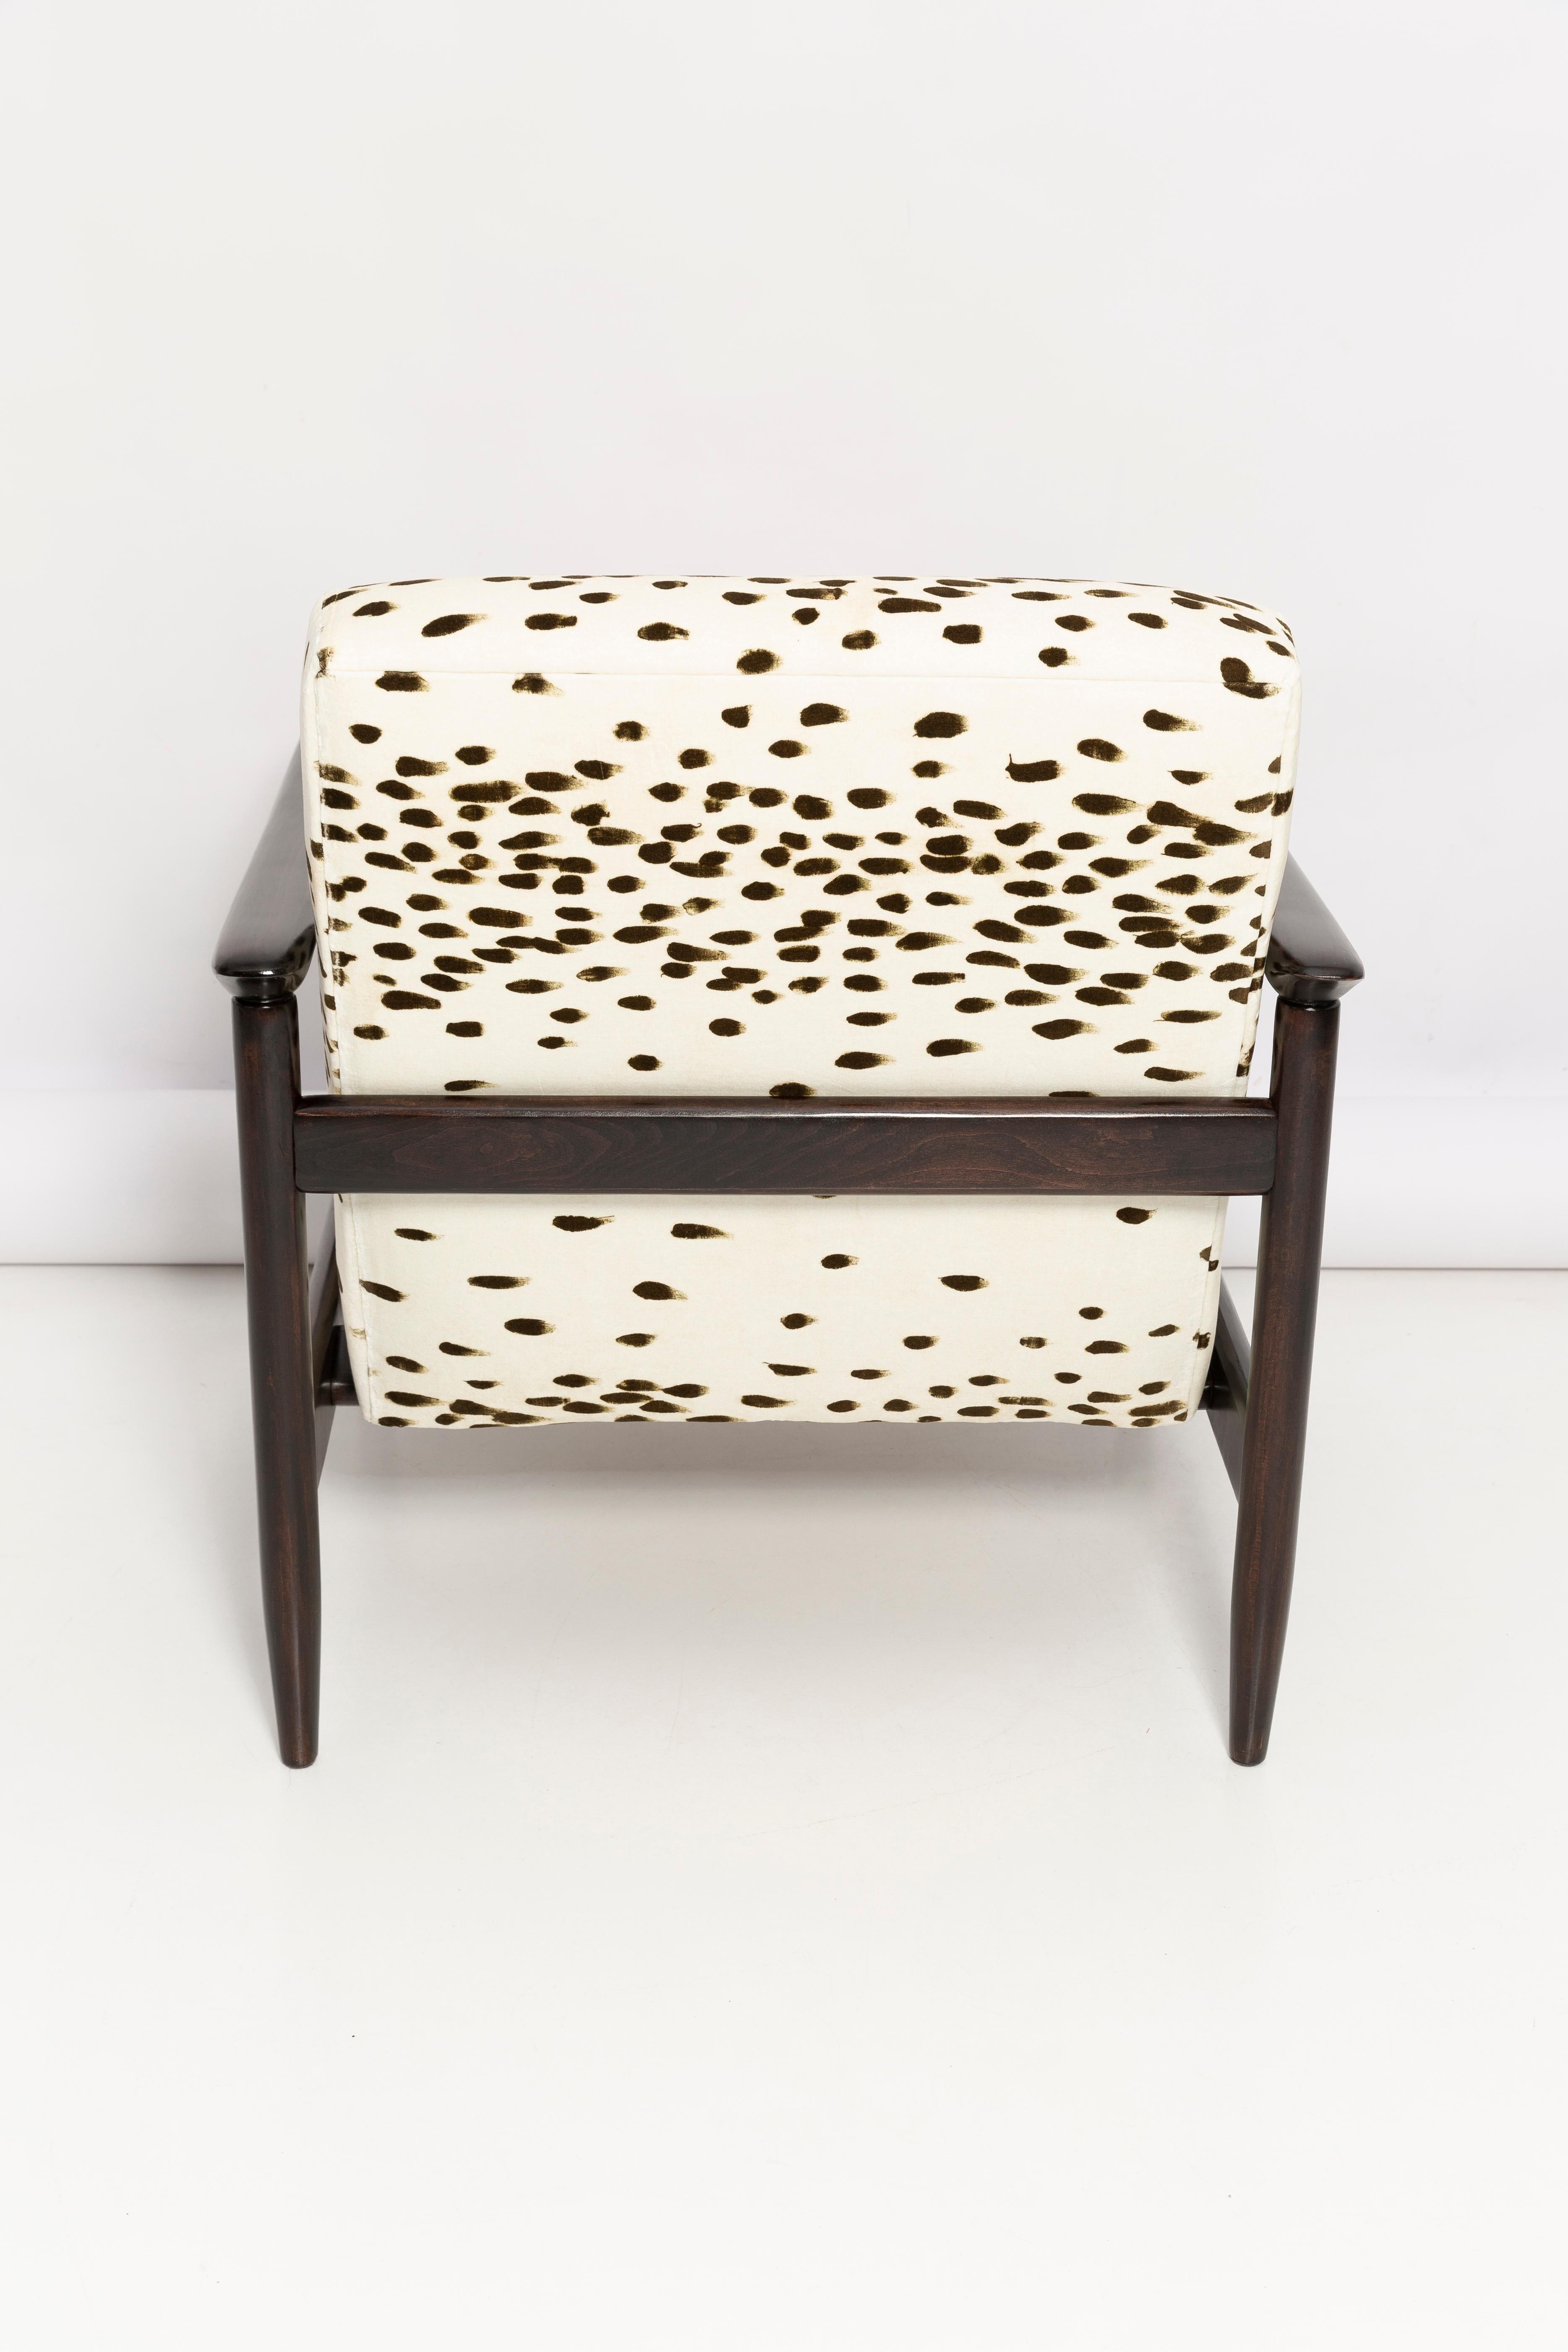 Set of Two Mid Century Dalmatian Velvet Armchairs, by Edmund Homa, Europe, 1960s For Sale 9